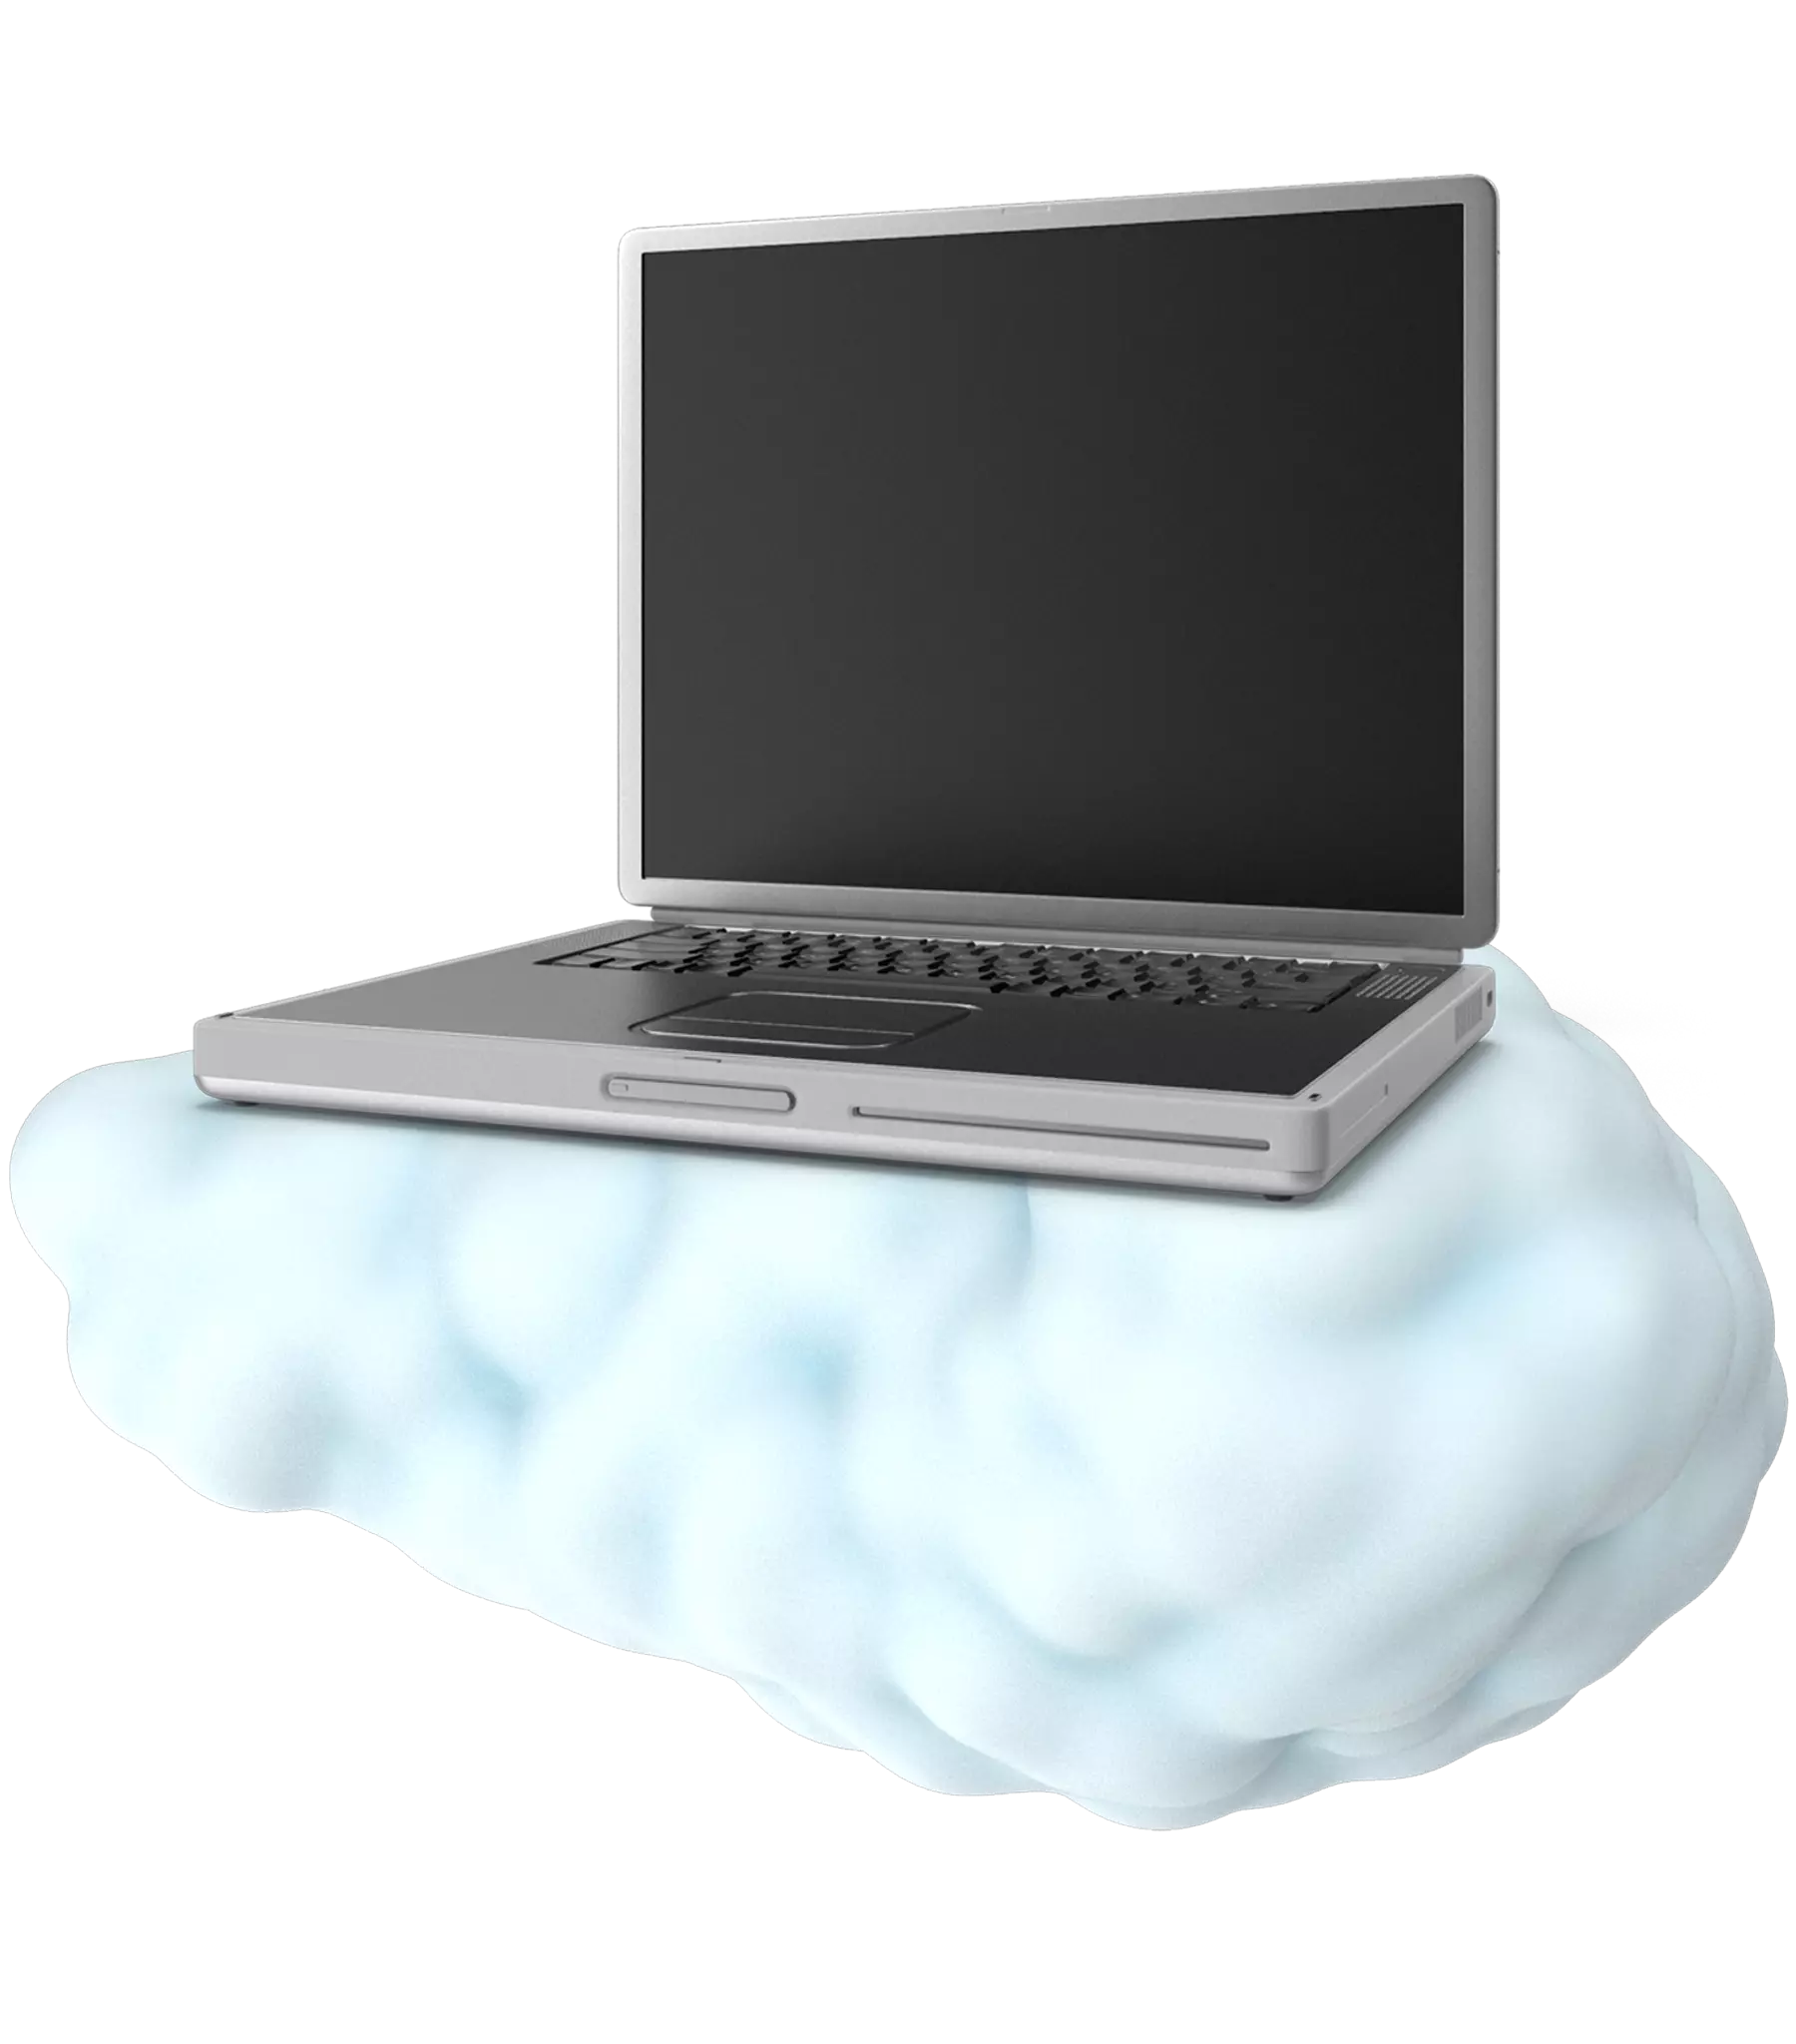 A laptop on a cloud as the Cloud Computing quickcard header image